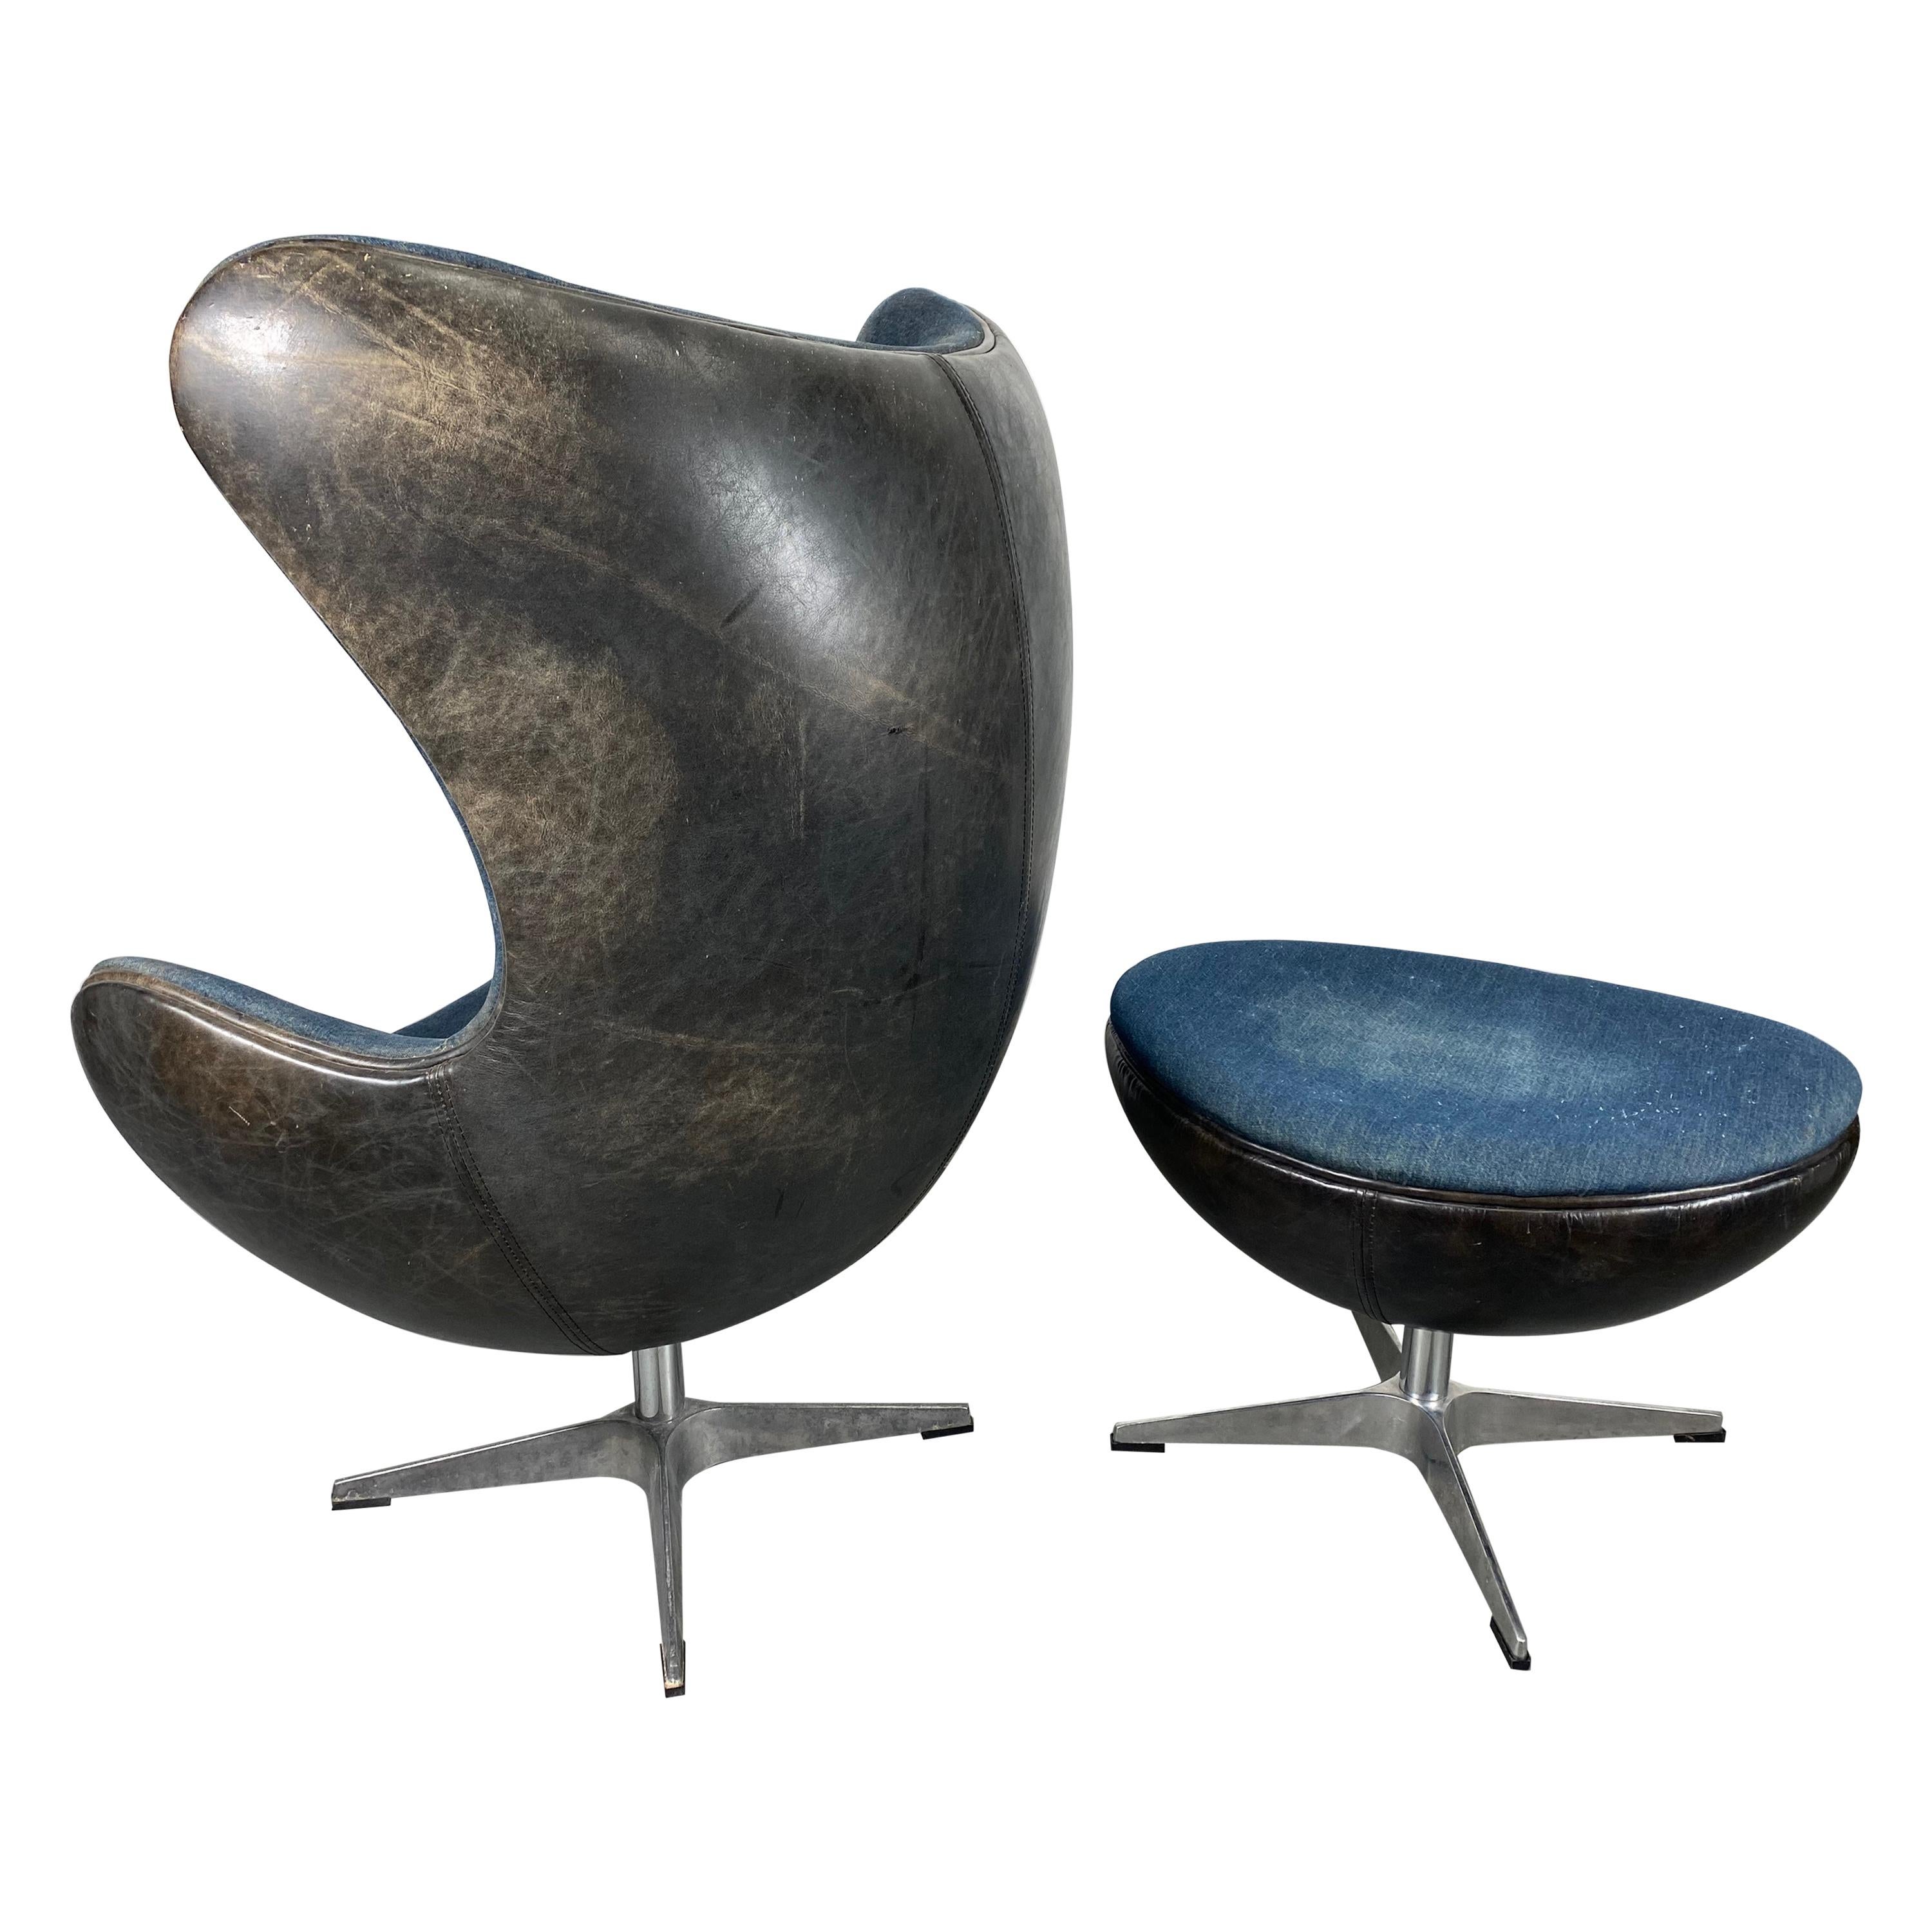 Classic Egg Chair and Ottoman, Black Leather and Denim, After Arne Jacobsen